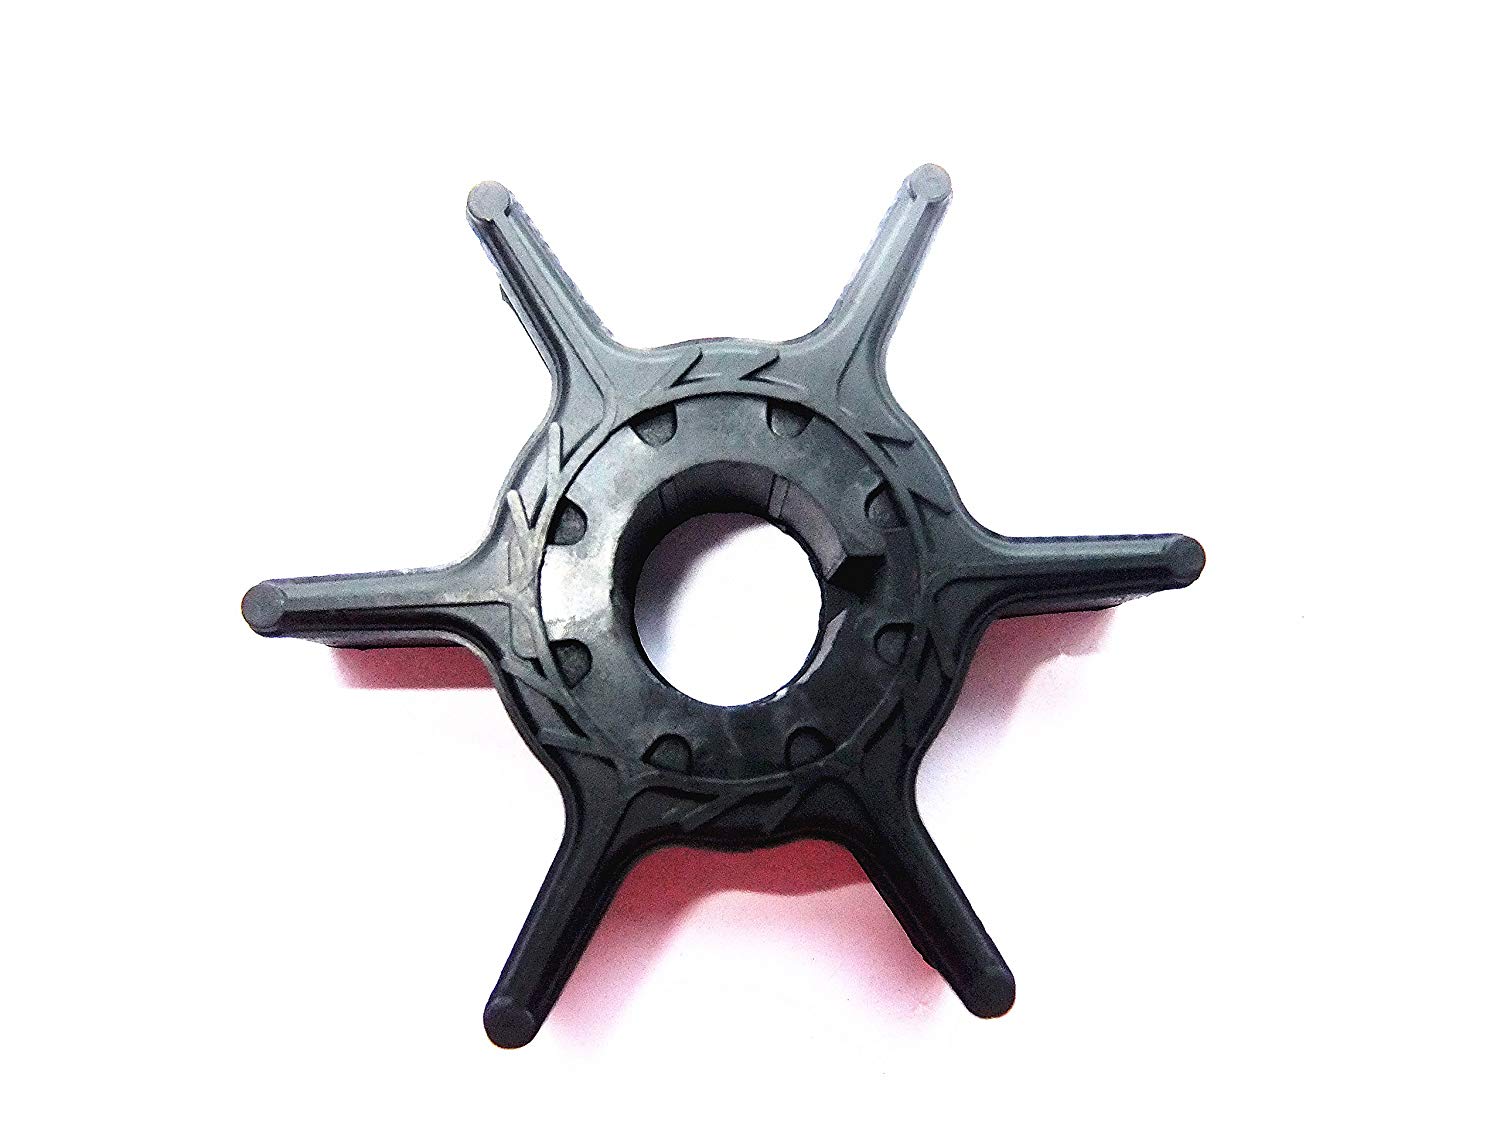 Water Pump Impeller for Yamaha Outboard 4 Stroke T8/9.9 F9.9/15